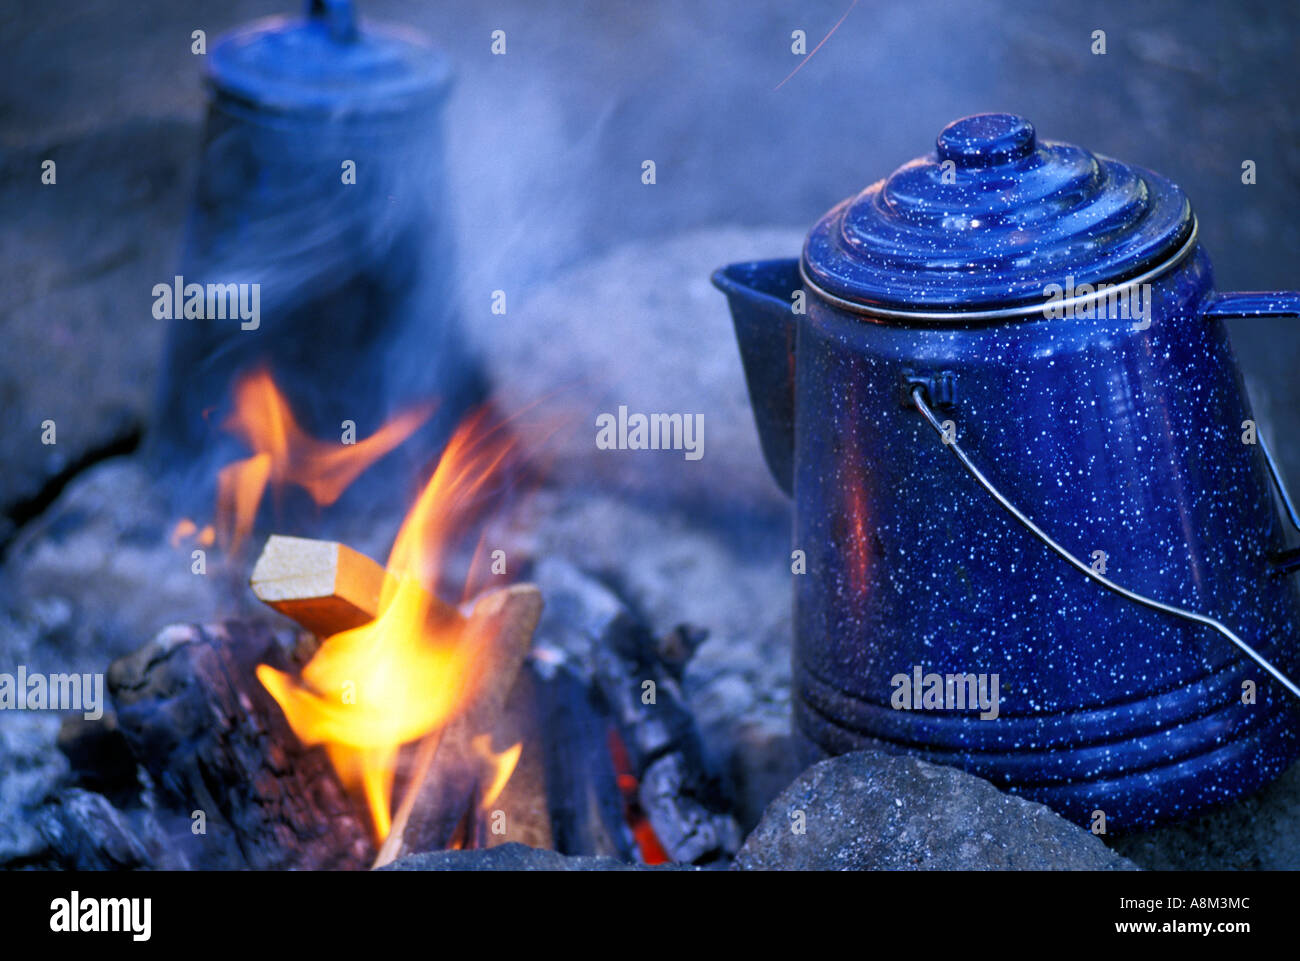 https://c8.alamy.com/comp/A8M3MC/coffee-pots-heating-up-on-outdoor-campfire-middle-fork-of-the-salmon-A8M3MC.jpg